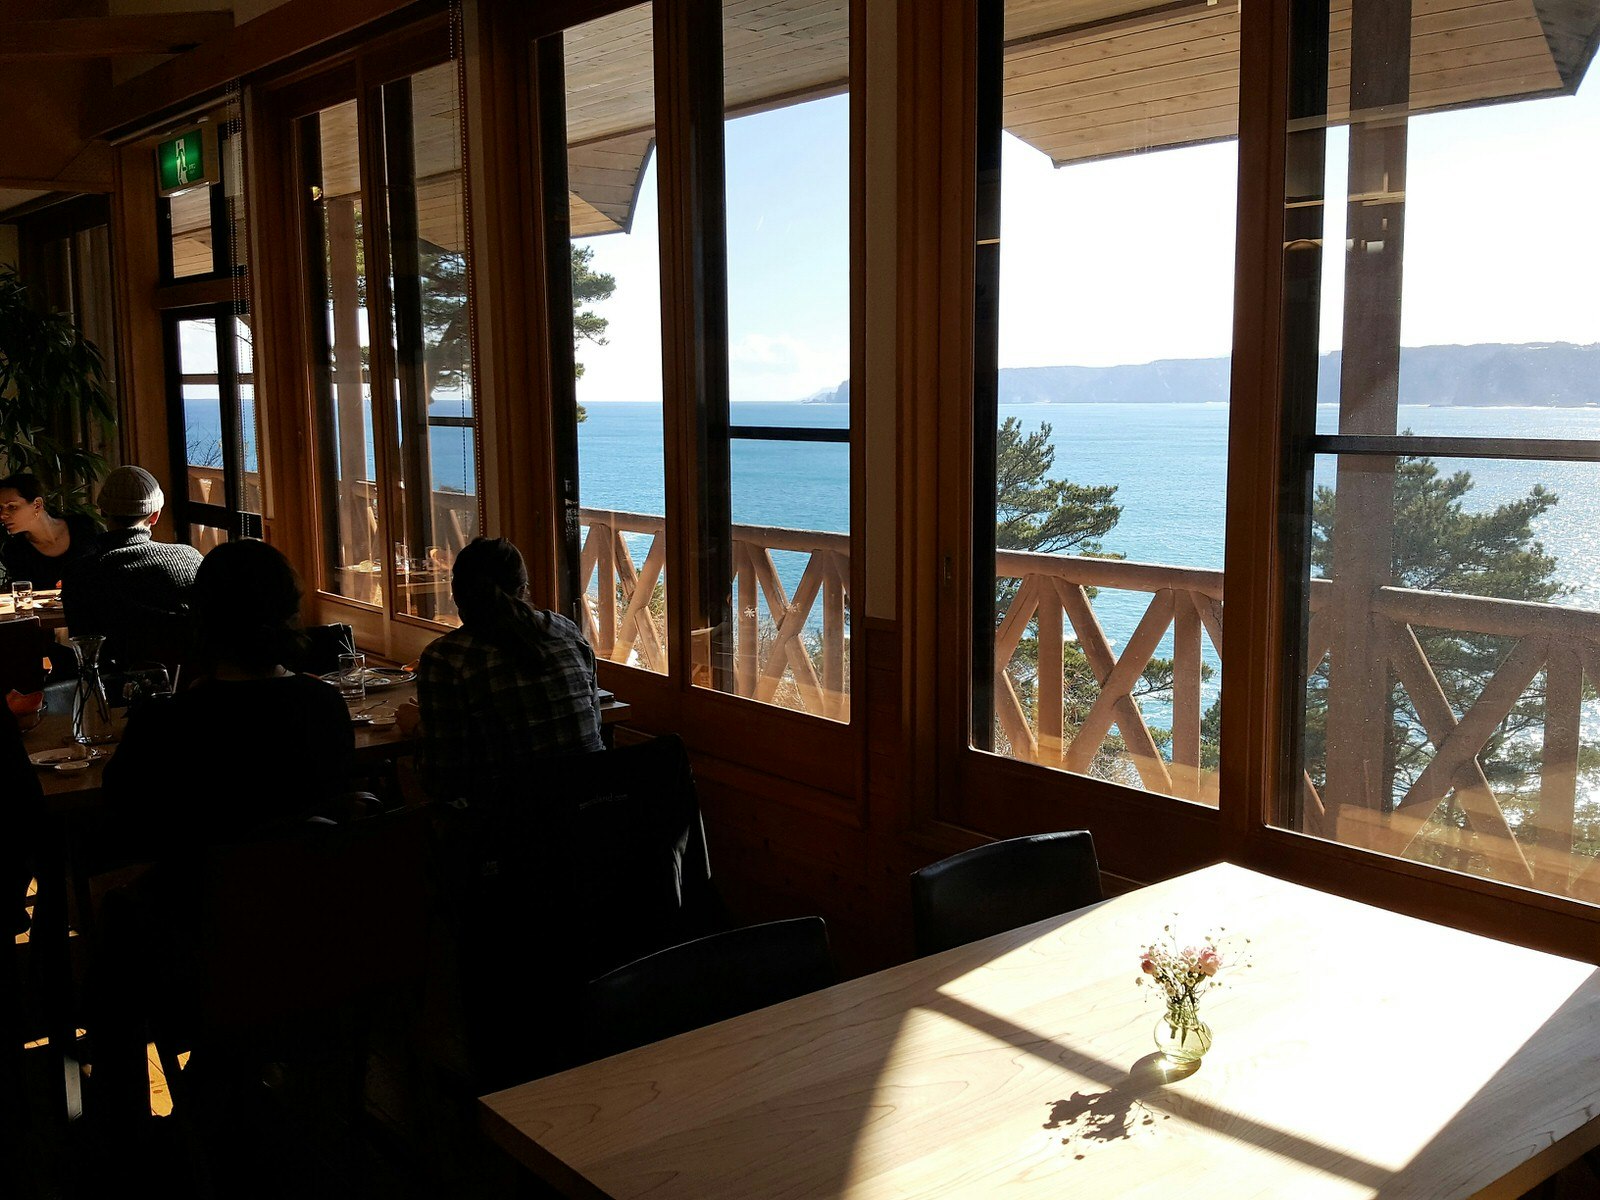 View from inside a restaurant looking through large windows to the blue ocean and cliffs beyond